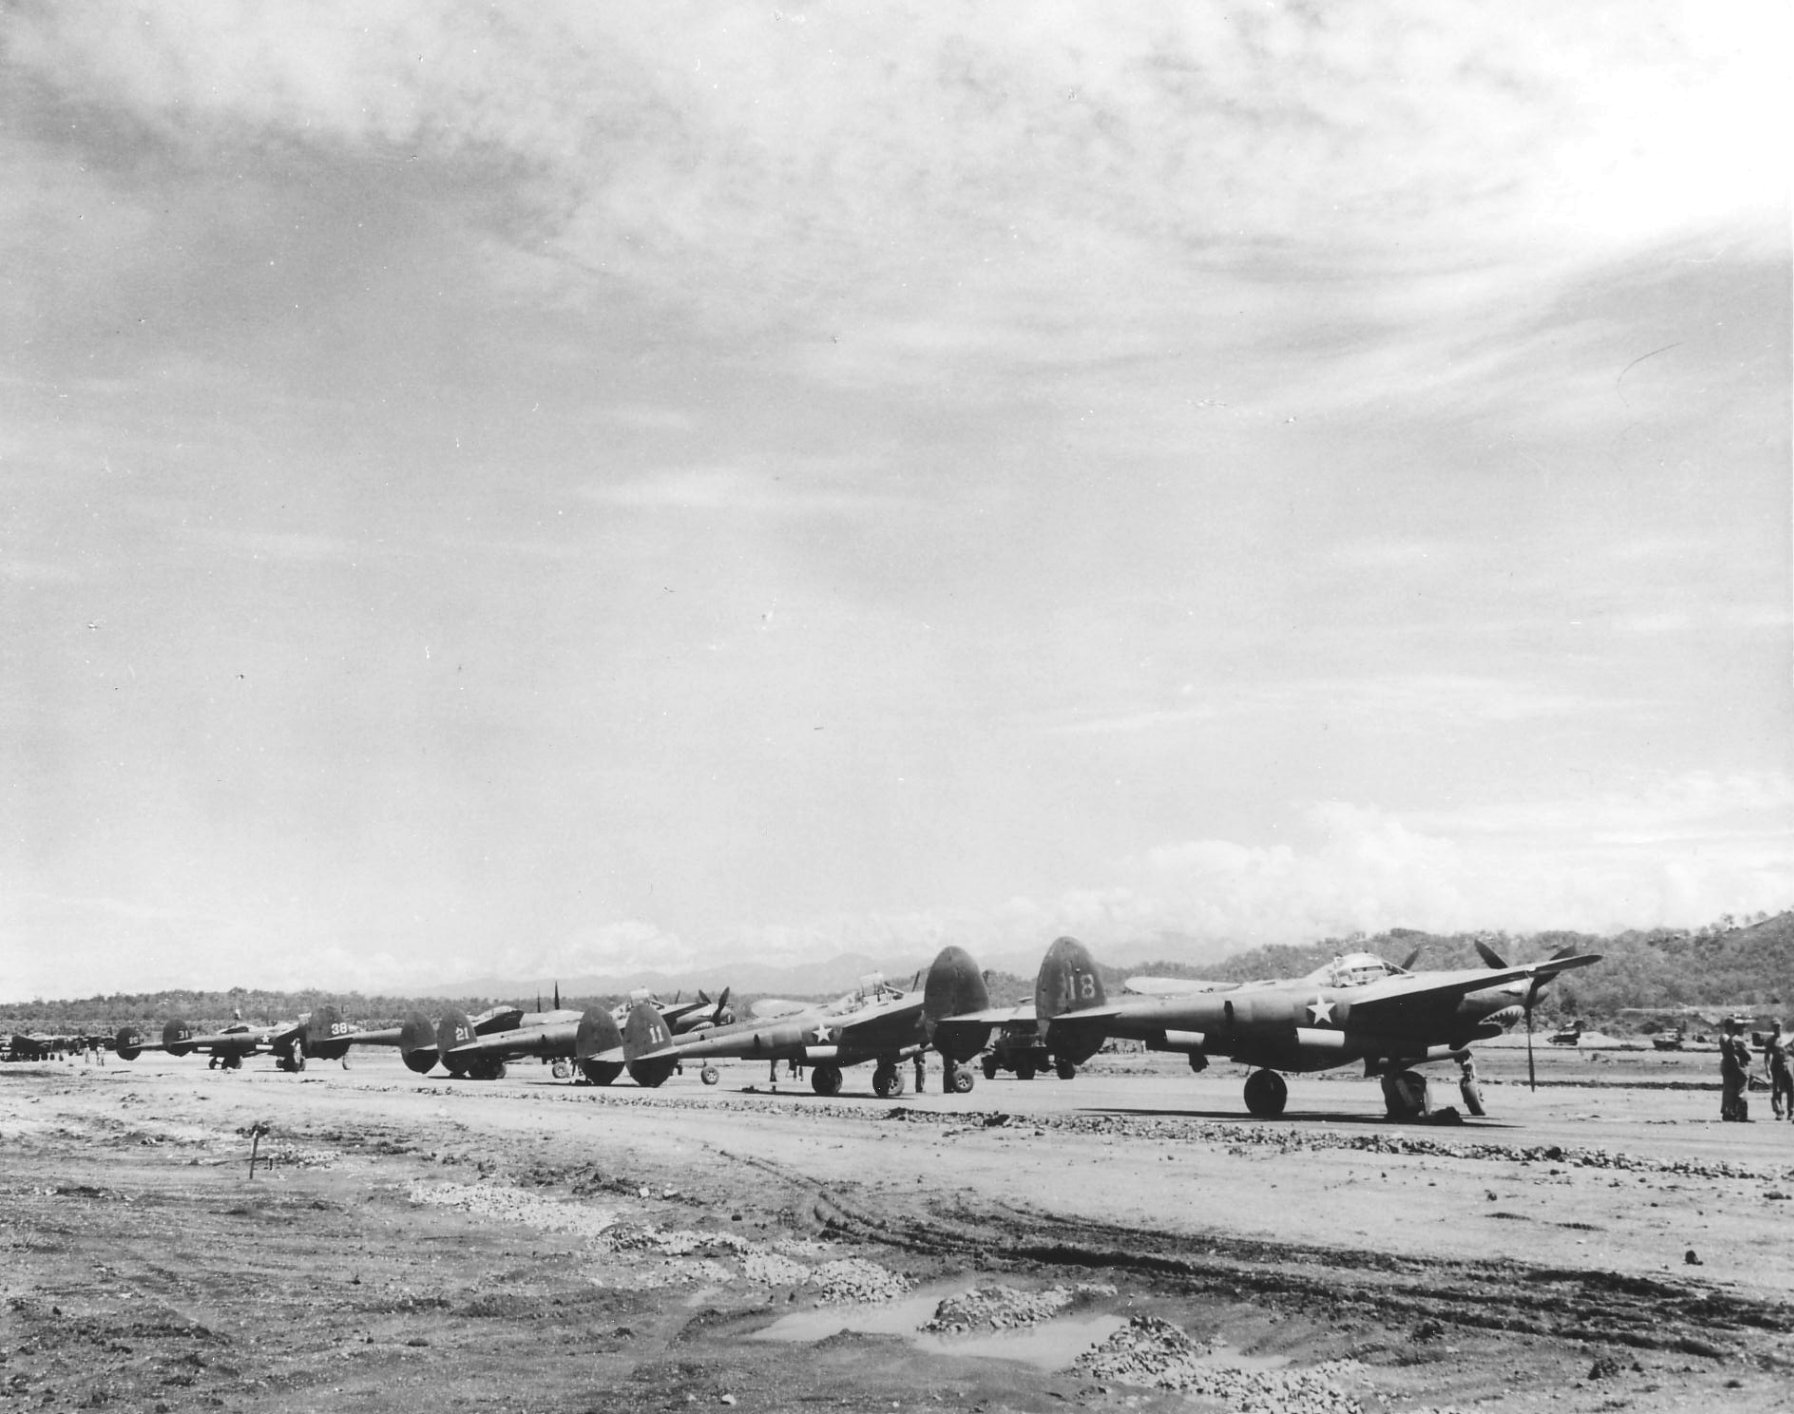 Line of P-38 Lightning escort fighters at Jackson Field, Port Moresby, New Guinea, 1942-1943